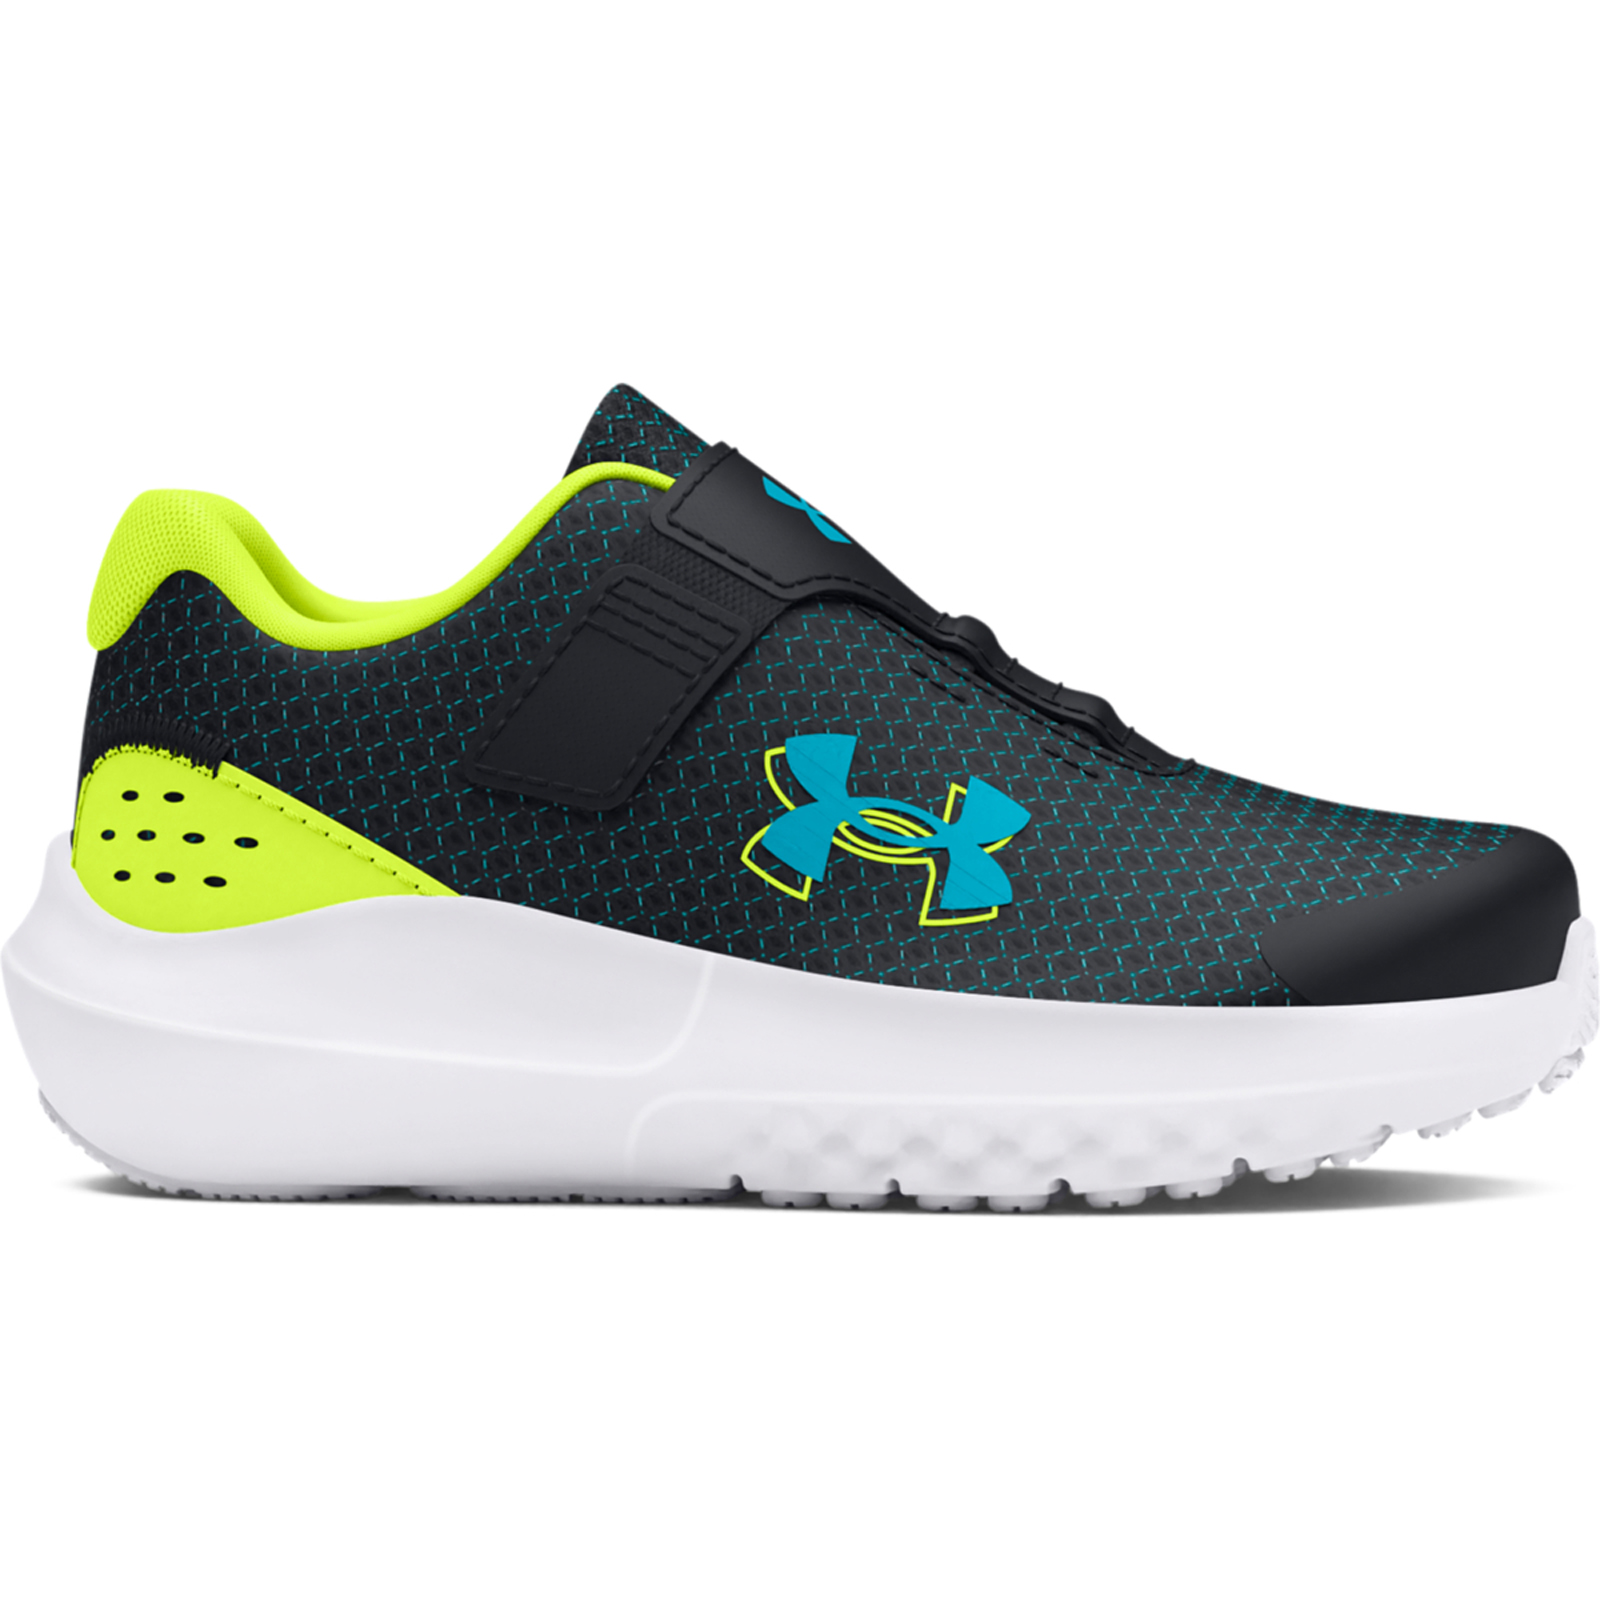 Under Armour - 3027105 UA BINF SURGE 4 AC - Black/High Vis Yellow/Circuit Teal Παιδικά > Παπούτσια > Αθλητικά > Παπούτσι Low Cut